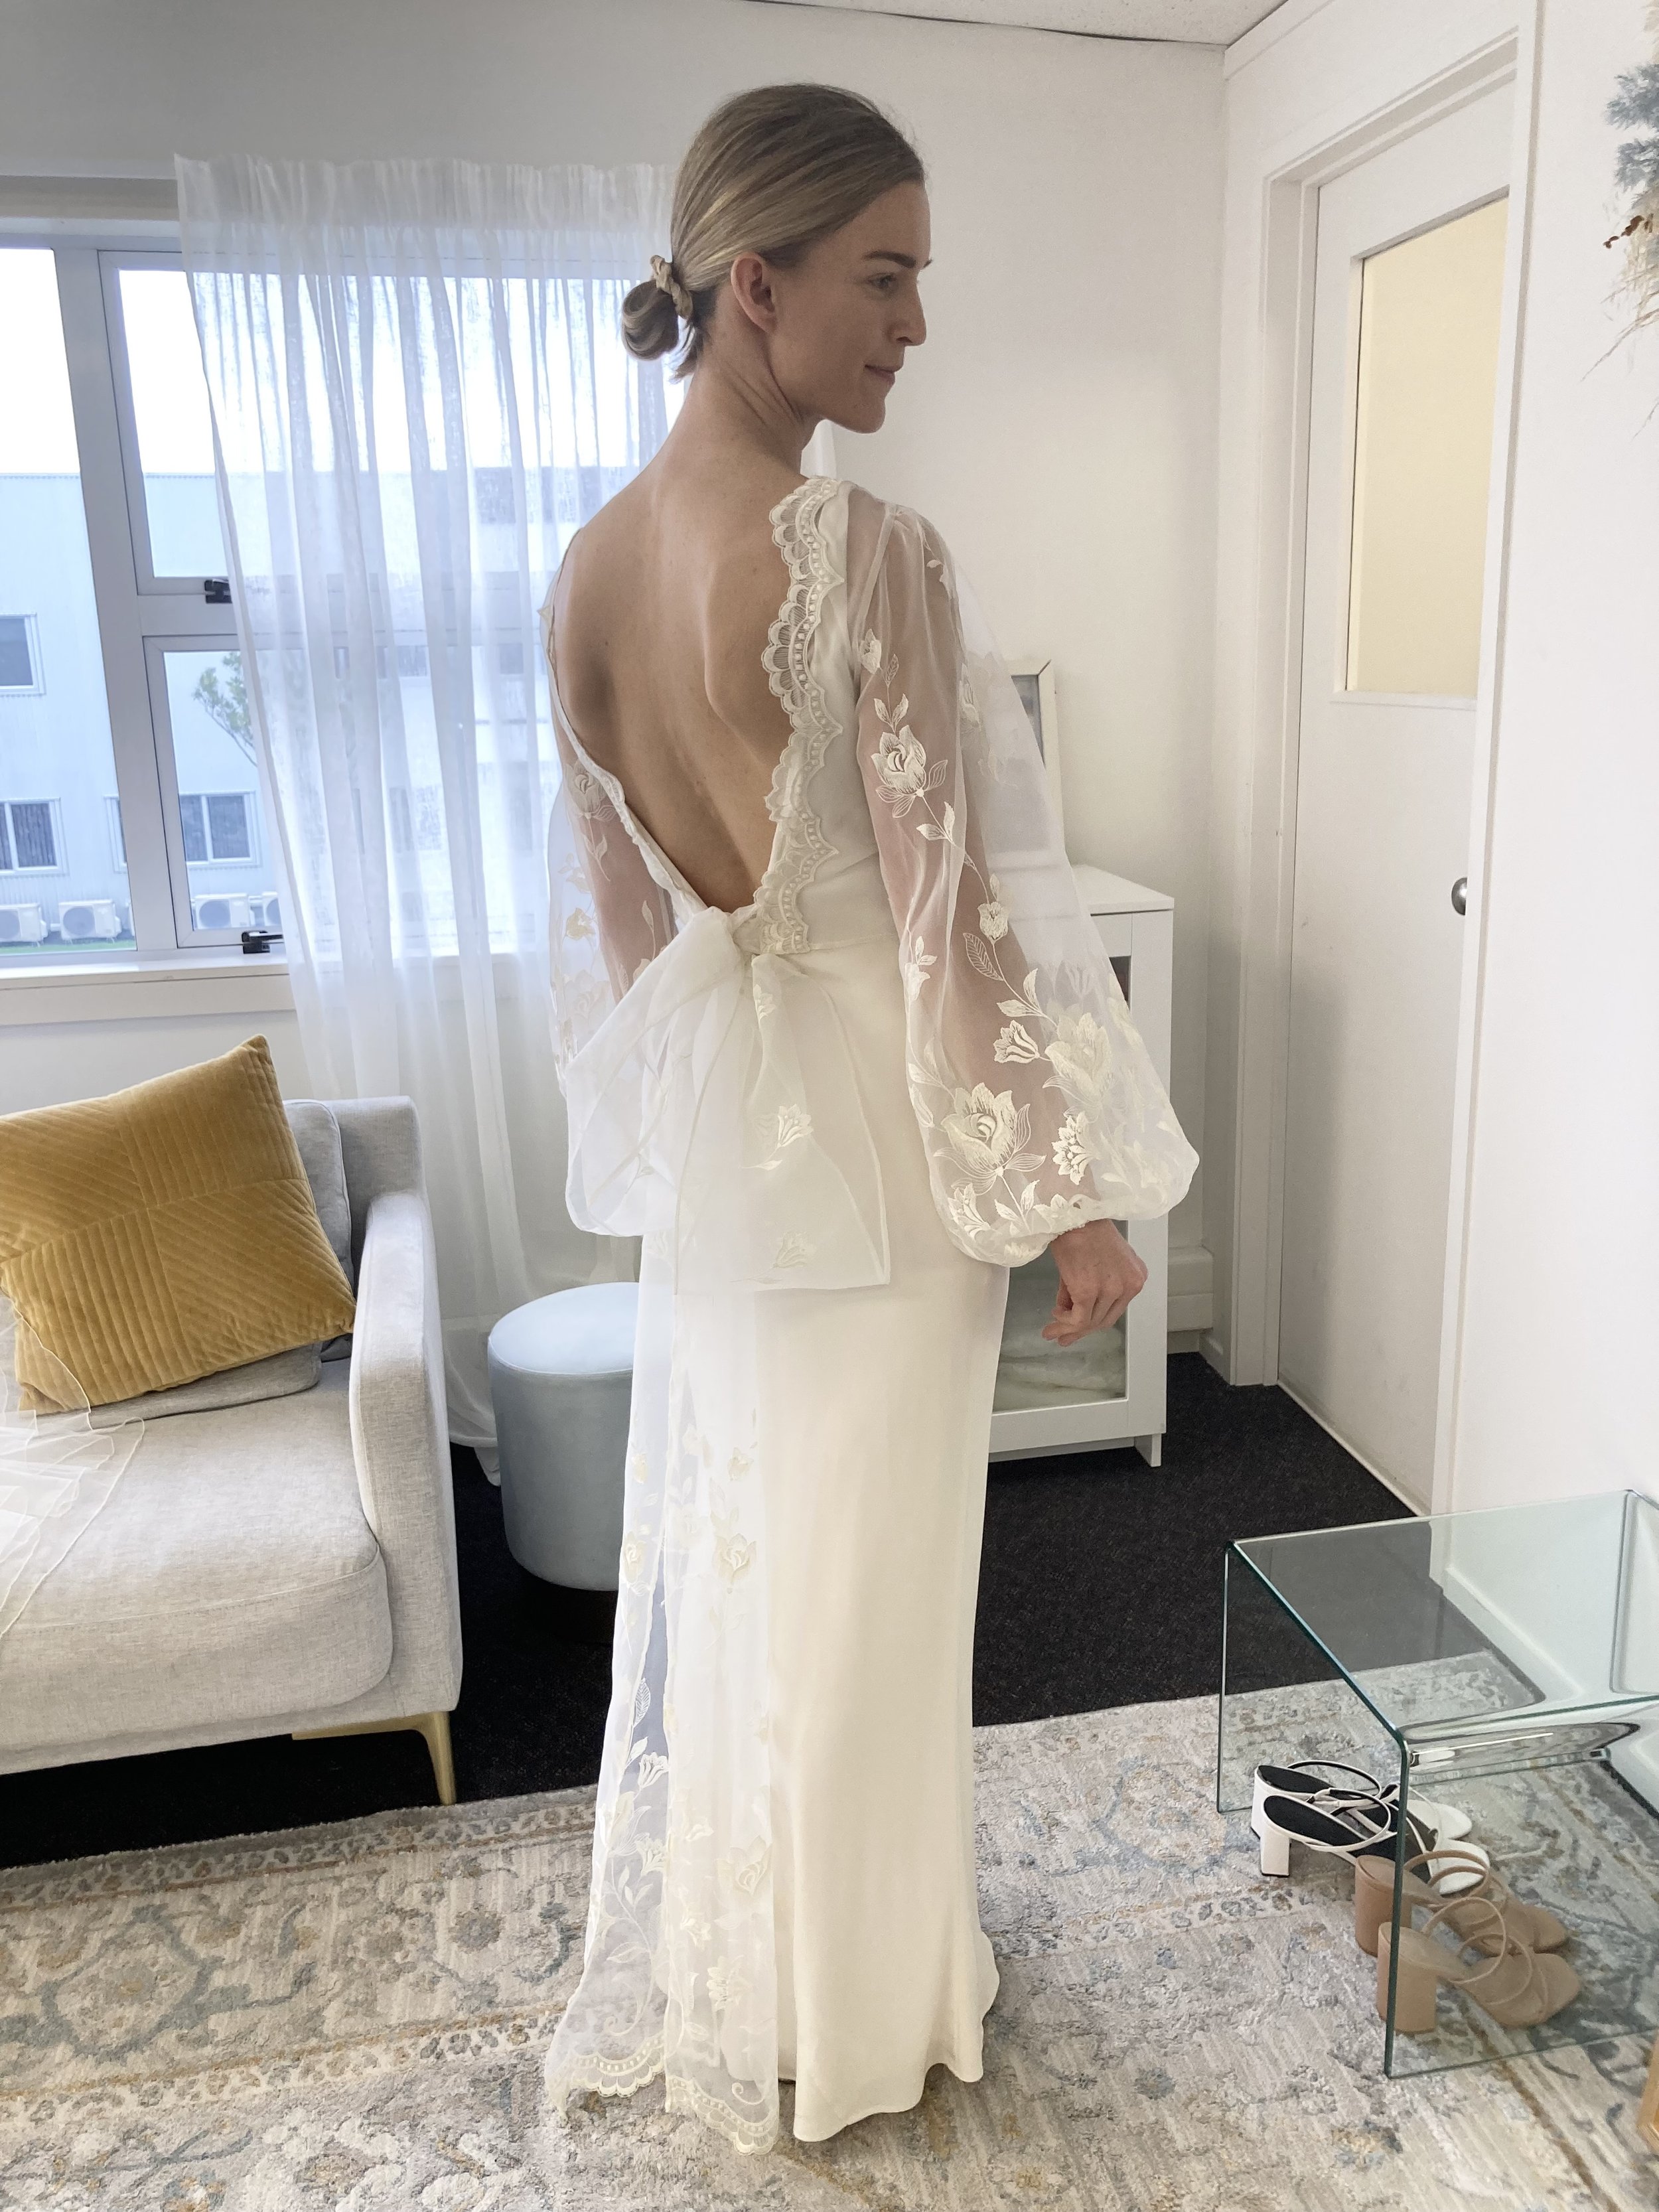 Final fitting with Alicia